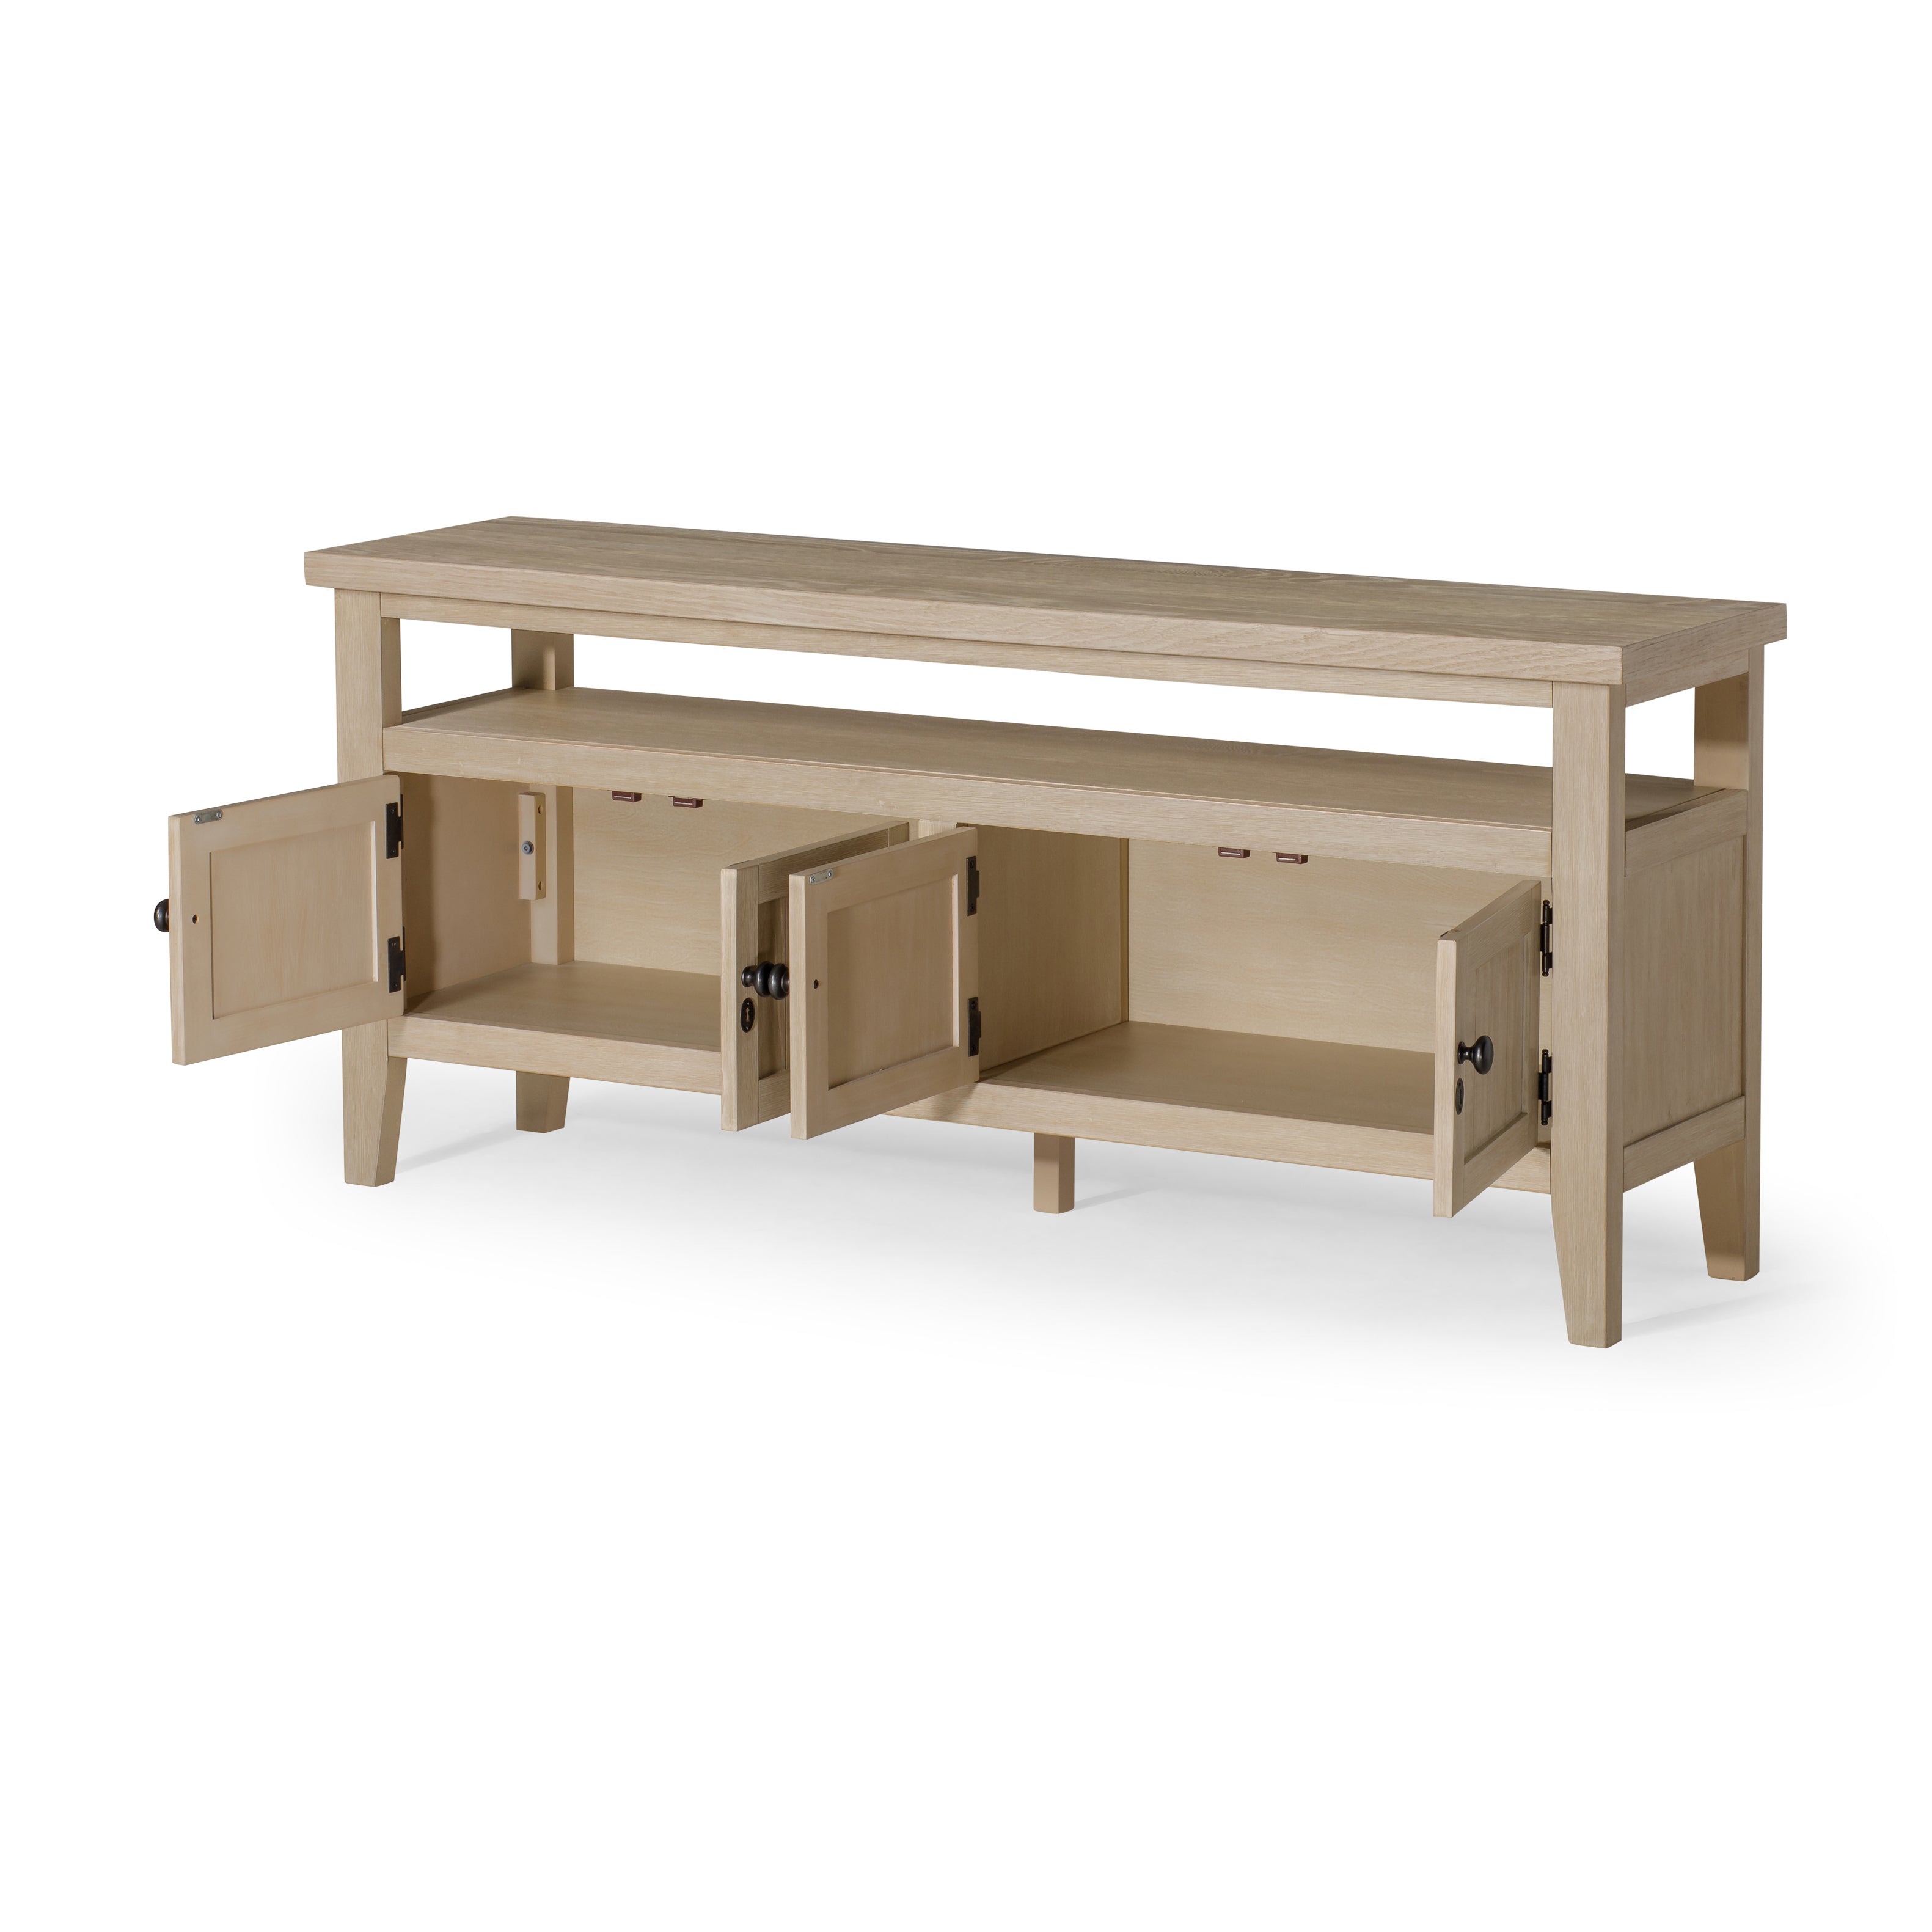 Turner Classical Wooden Media Unit in Antiqued White Finish in Media Units by Maven Lane